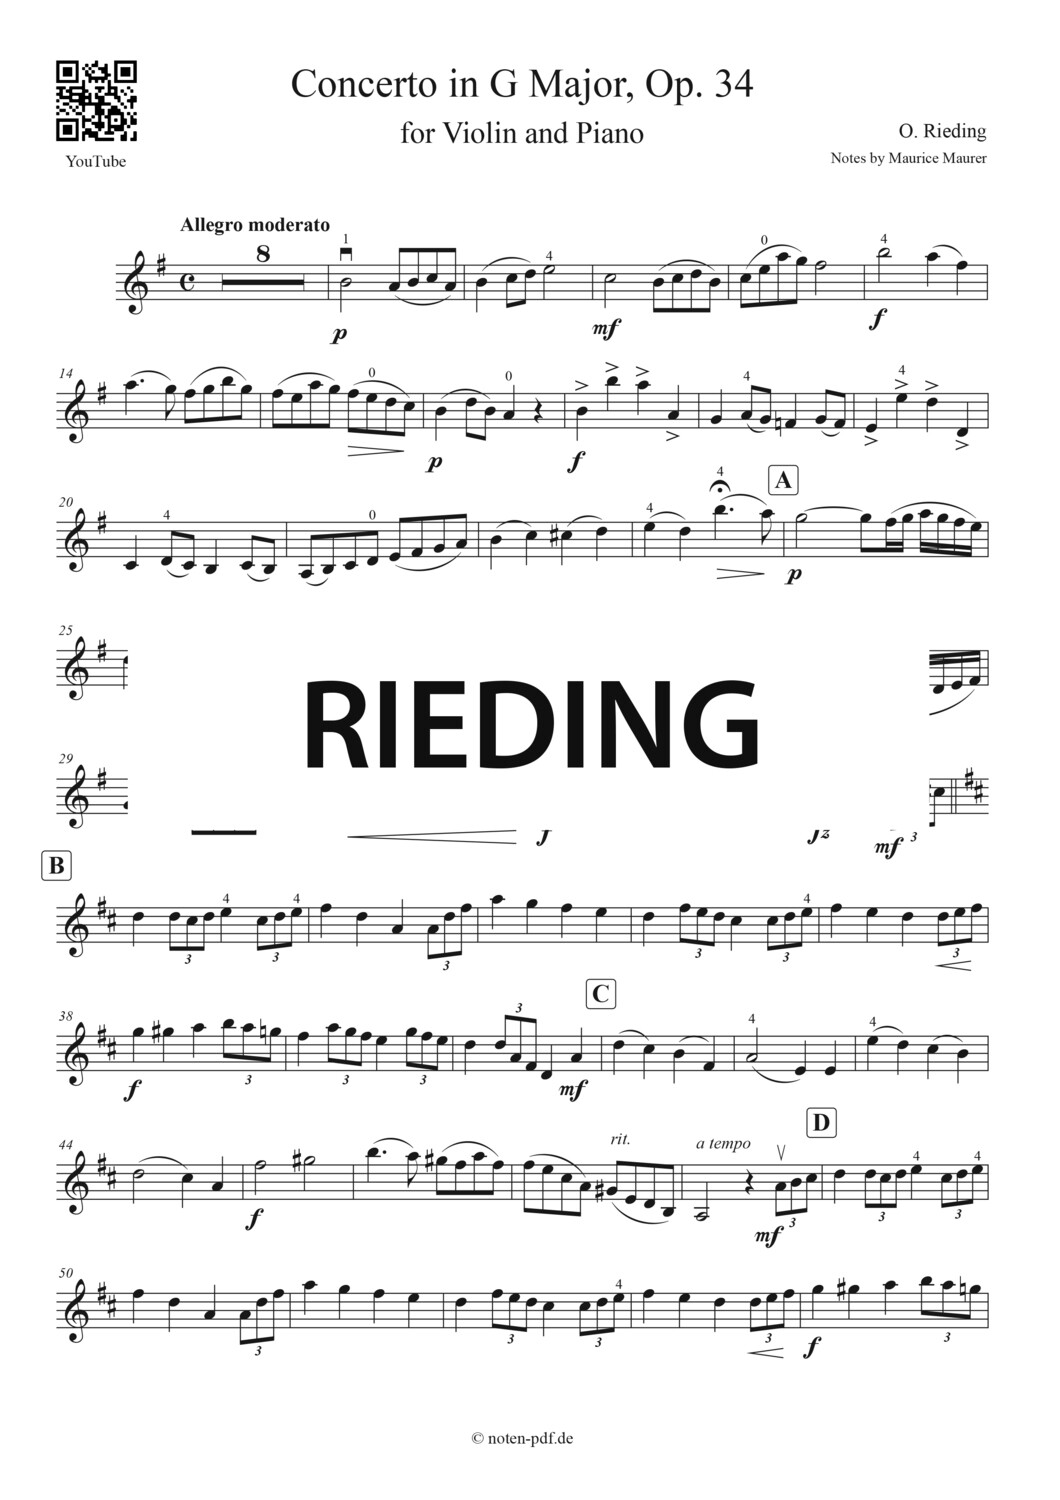 Rieding: Concerto in G Major Op. 34, All Movements